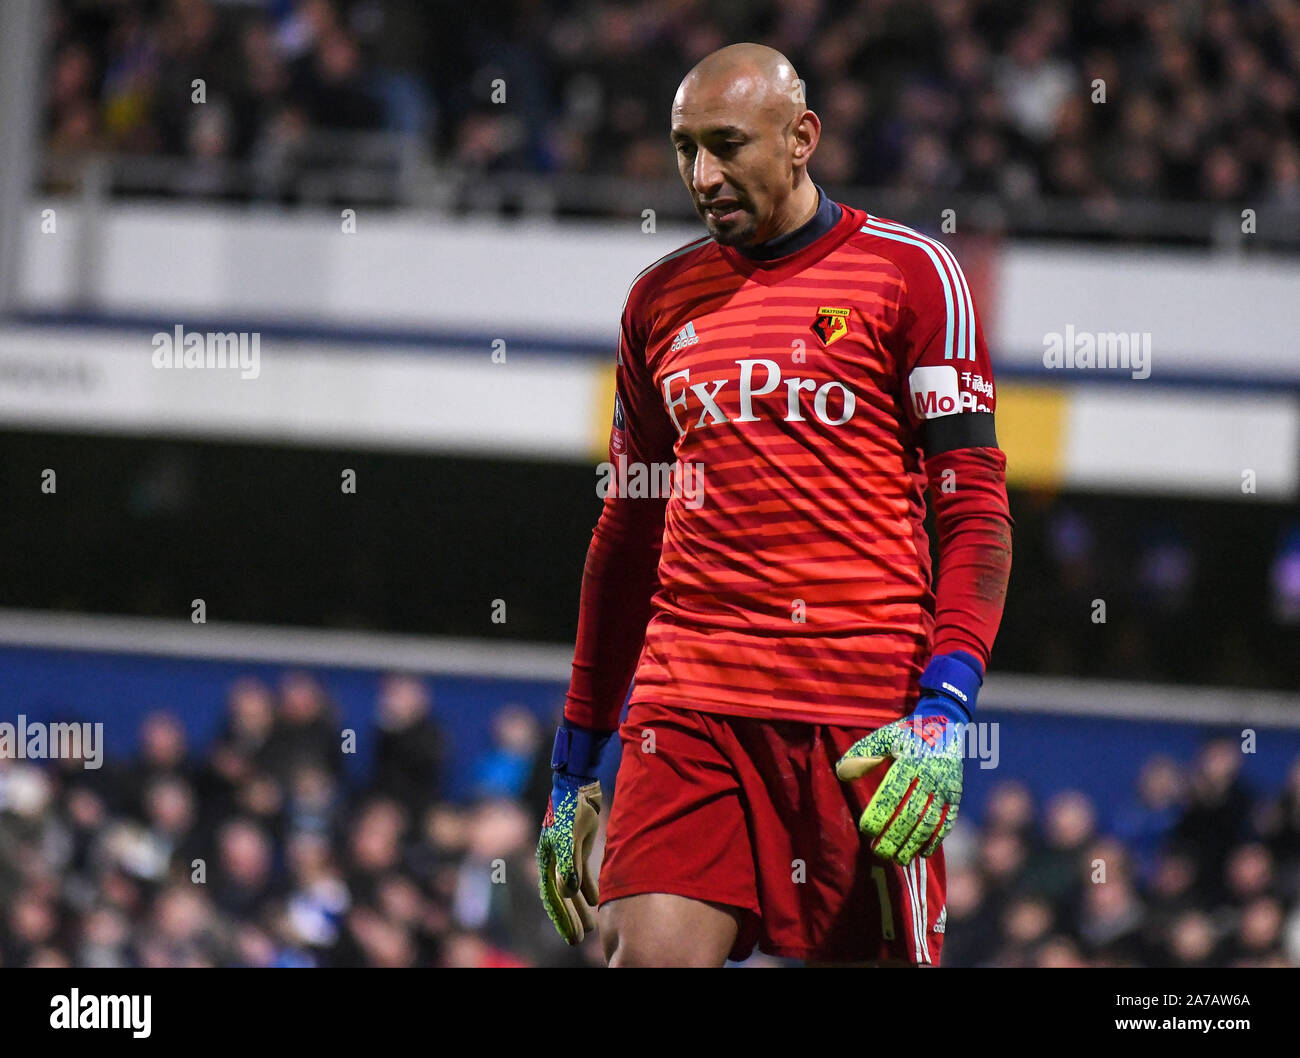 LONDON, ENGLAND - FEBRUARY 15, 2019: Heurelho Gomes of Watford pictured during the 2018/19 FA Cup Fifth Round game between Queens Park Rangers FC and Watford FC at Loftus Road Stadium. Stock Photo